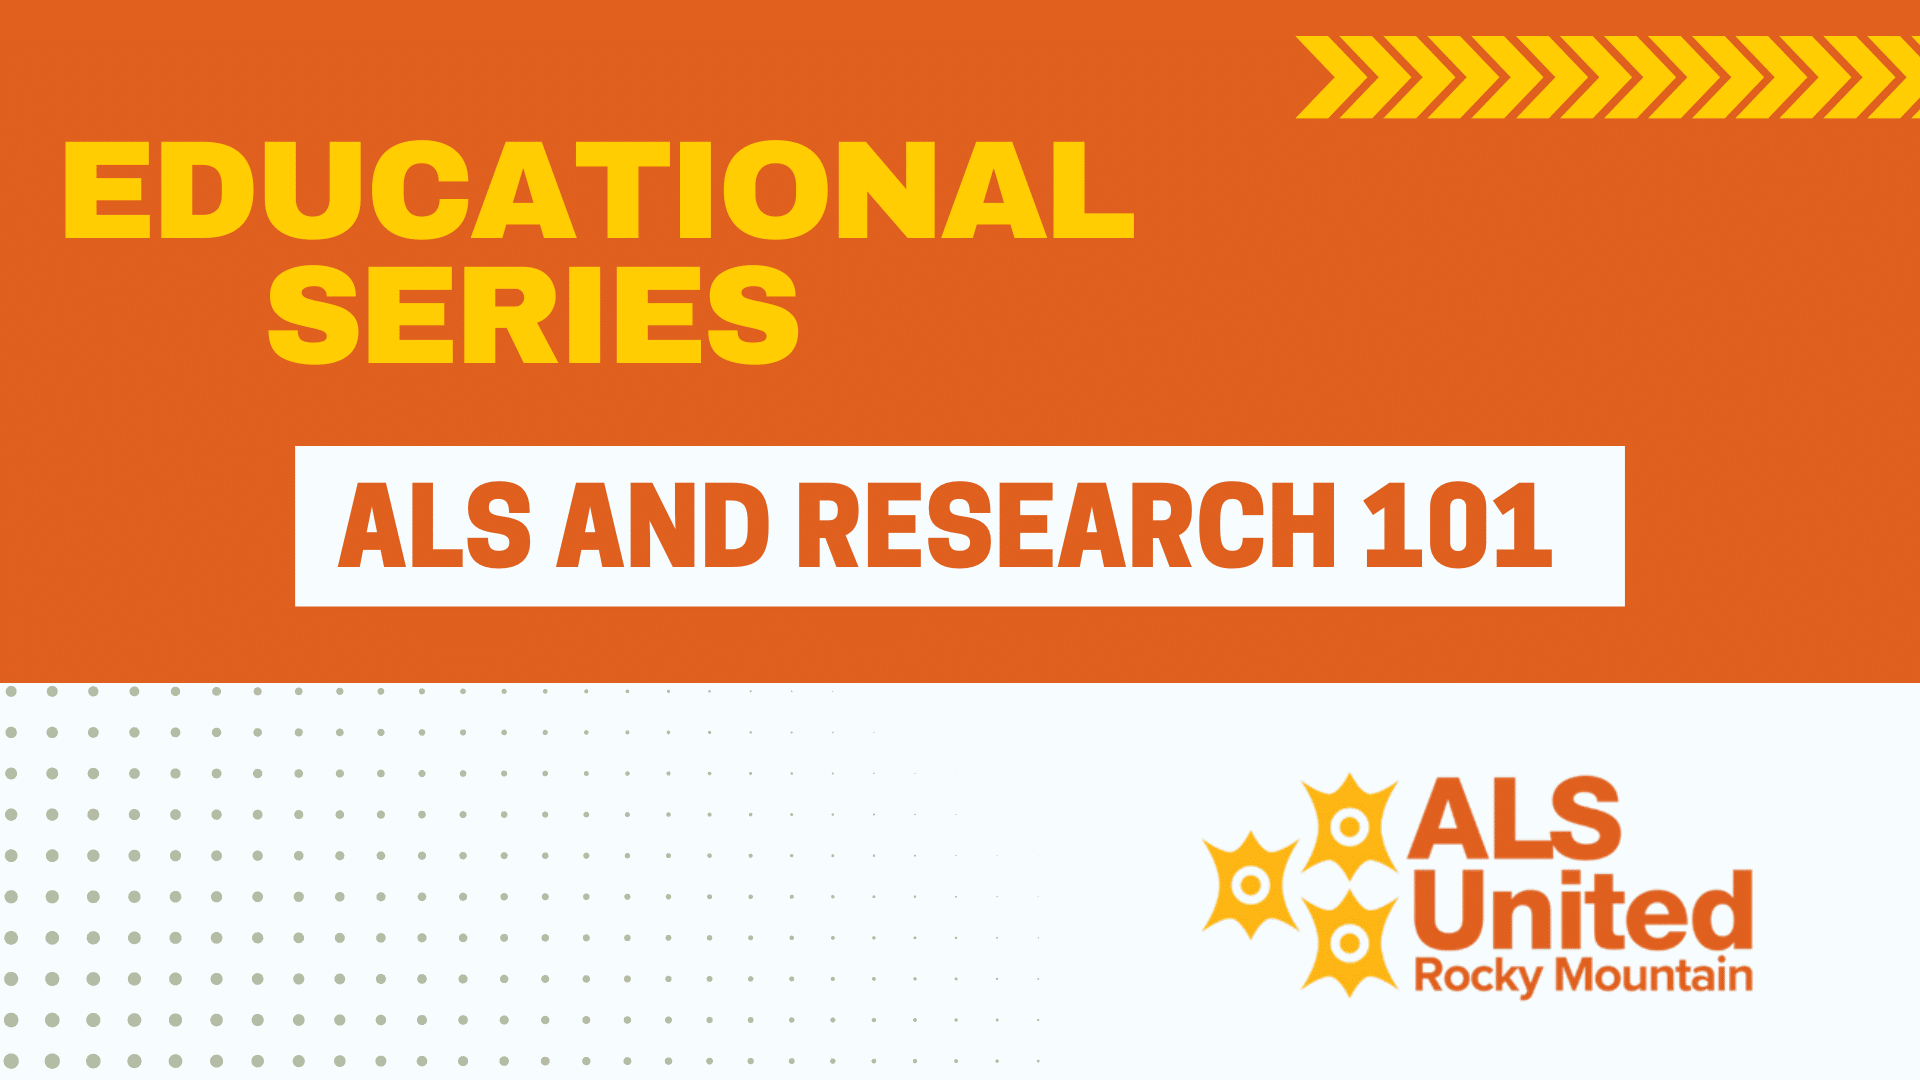 Educational Series: ALS and Research 101. Brought to you by ALS United Rocky Mountain Care Services